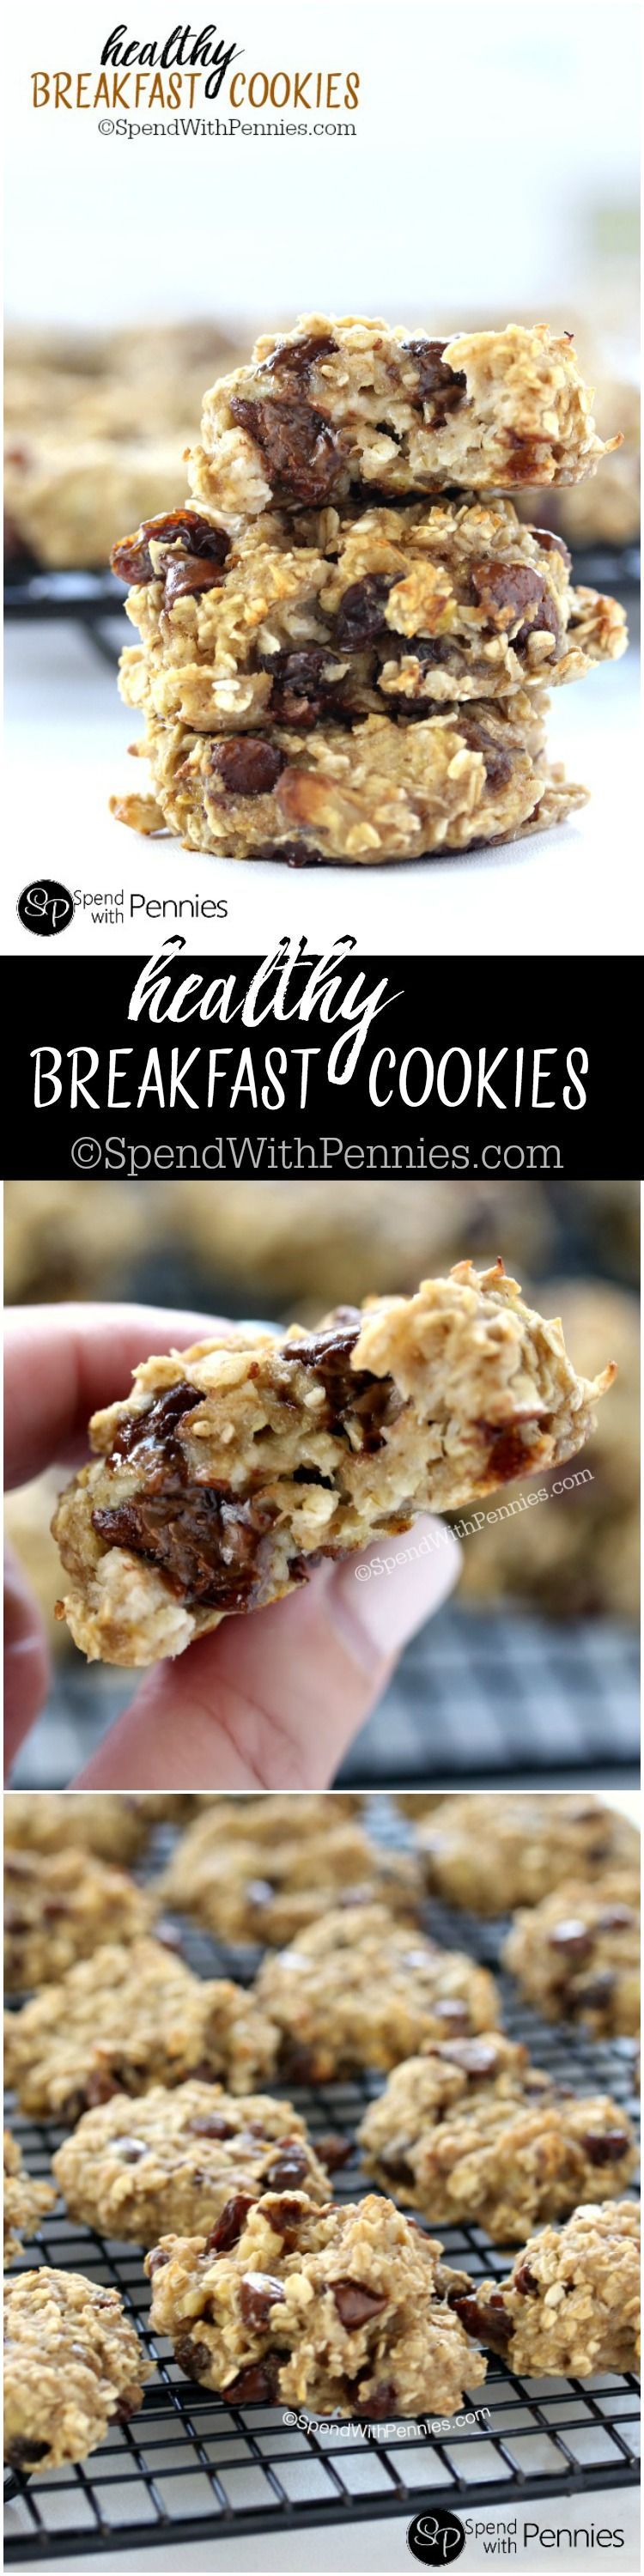 These breakfast cookies are deliciously moist & soft! A healthy cookie that my kids love any time of day! Made with simple